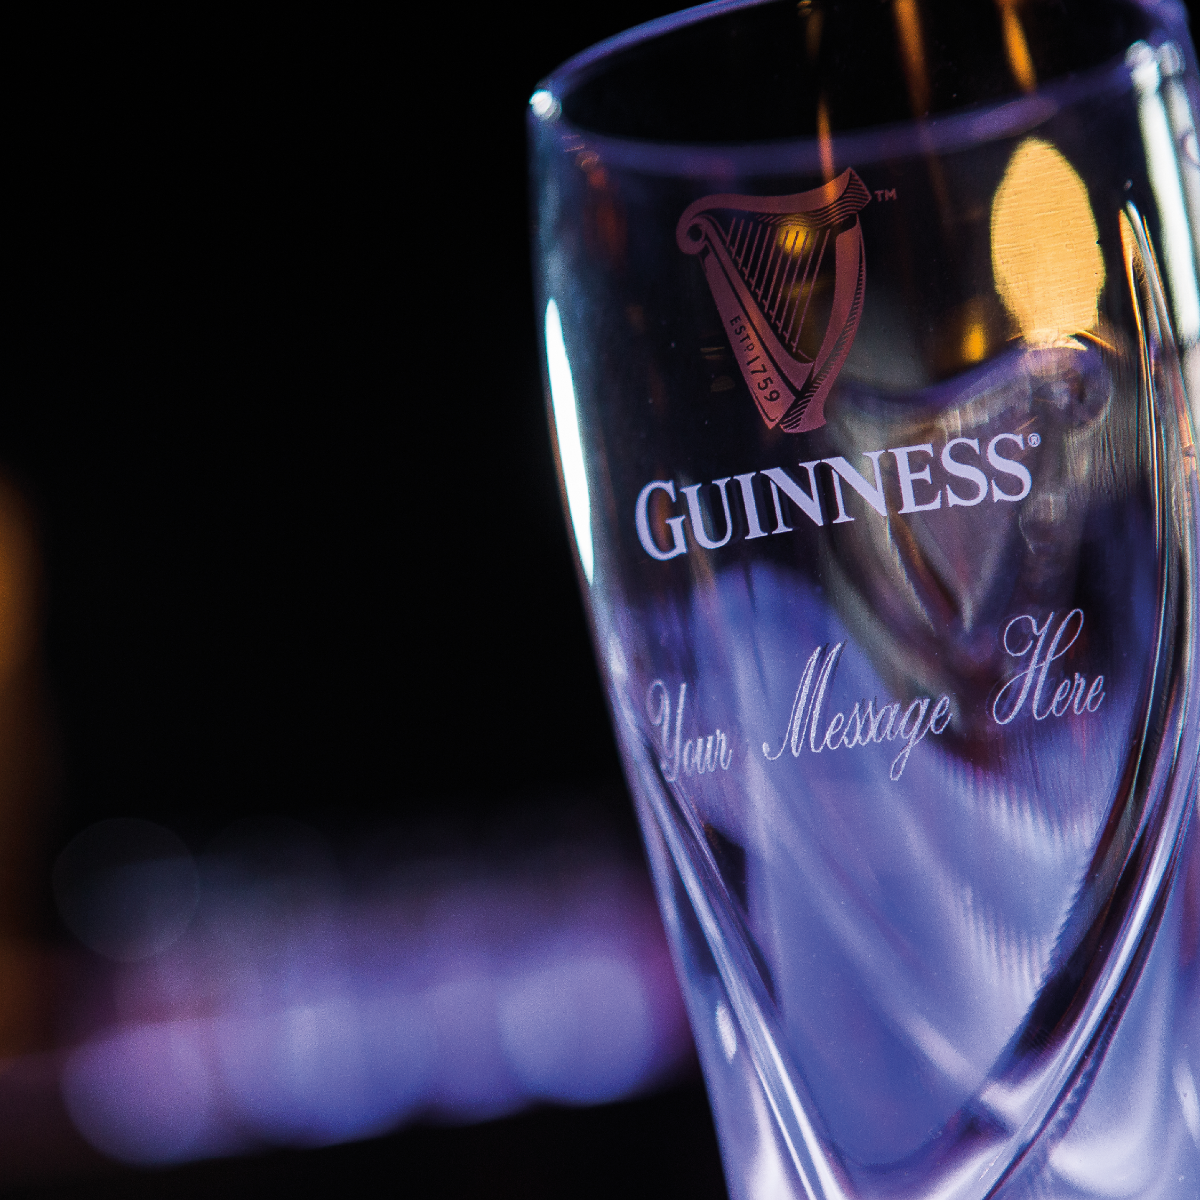 Bunratty Tavern - Want your very own personalized Guinness glass